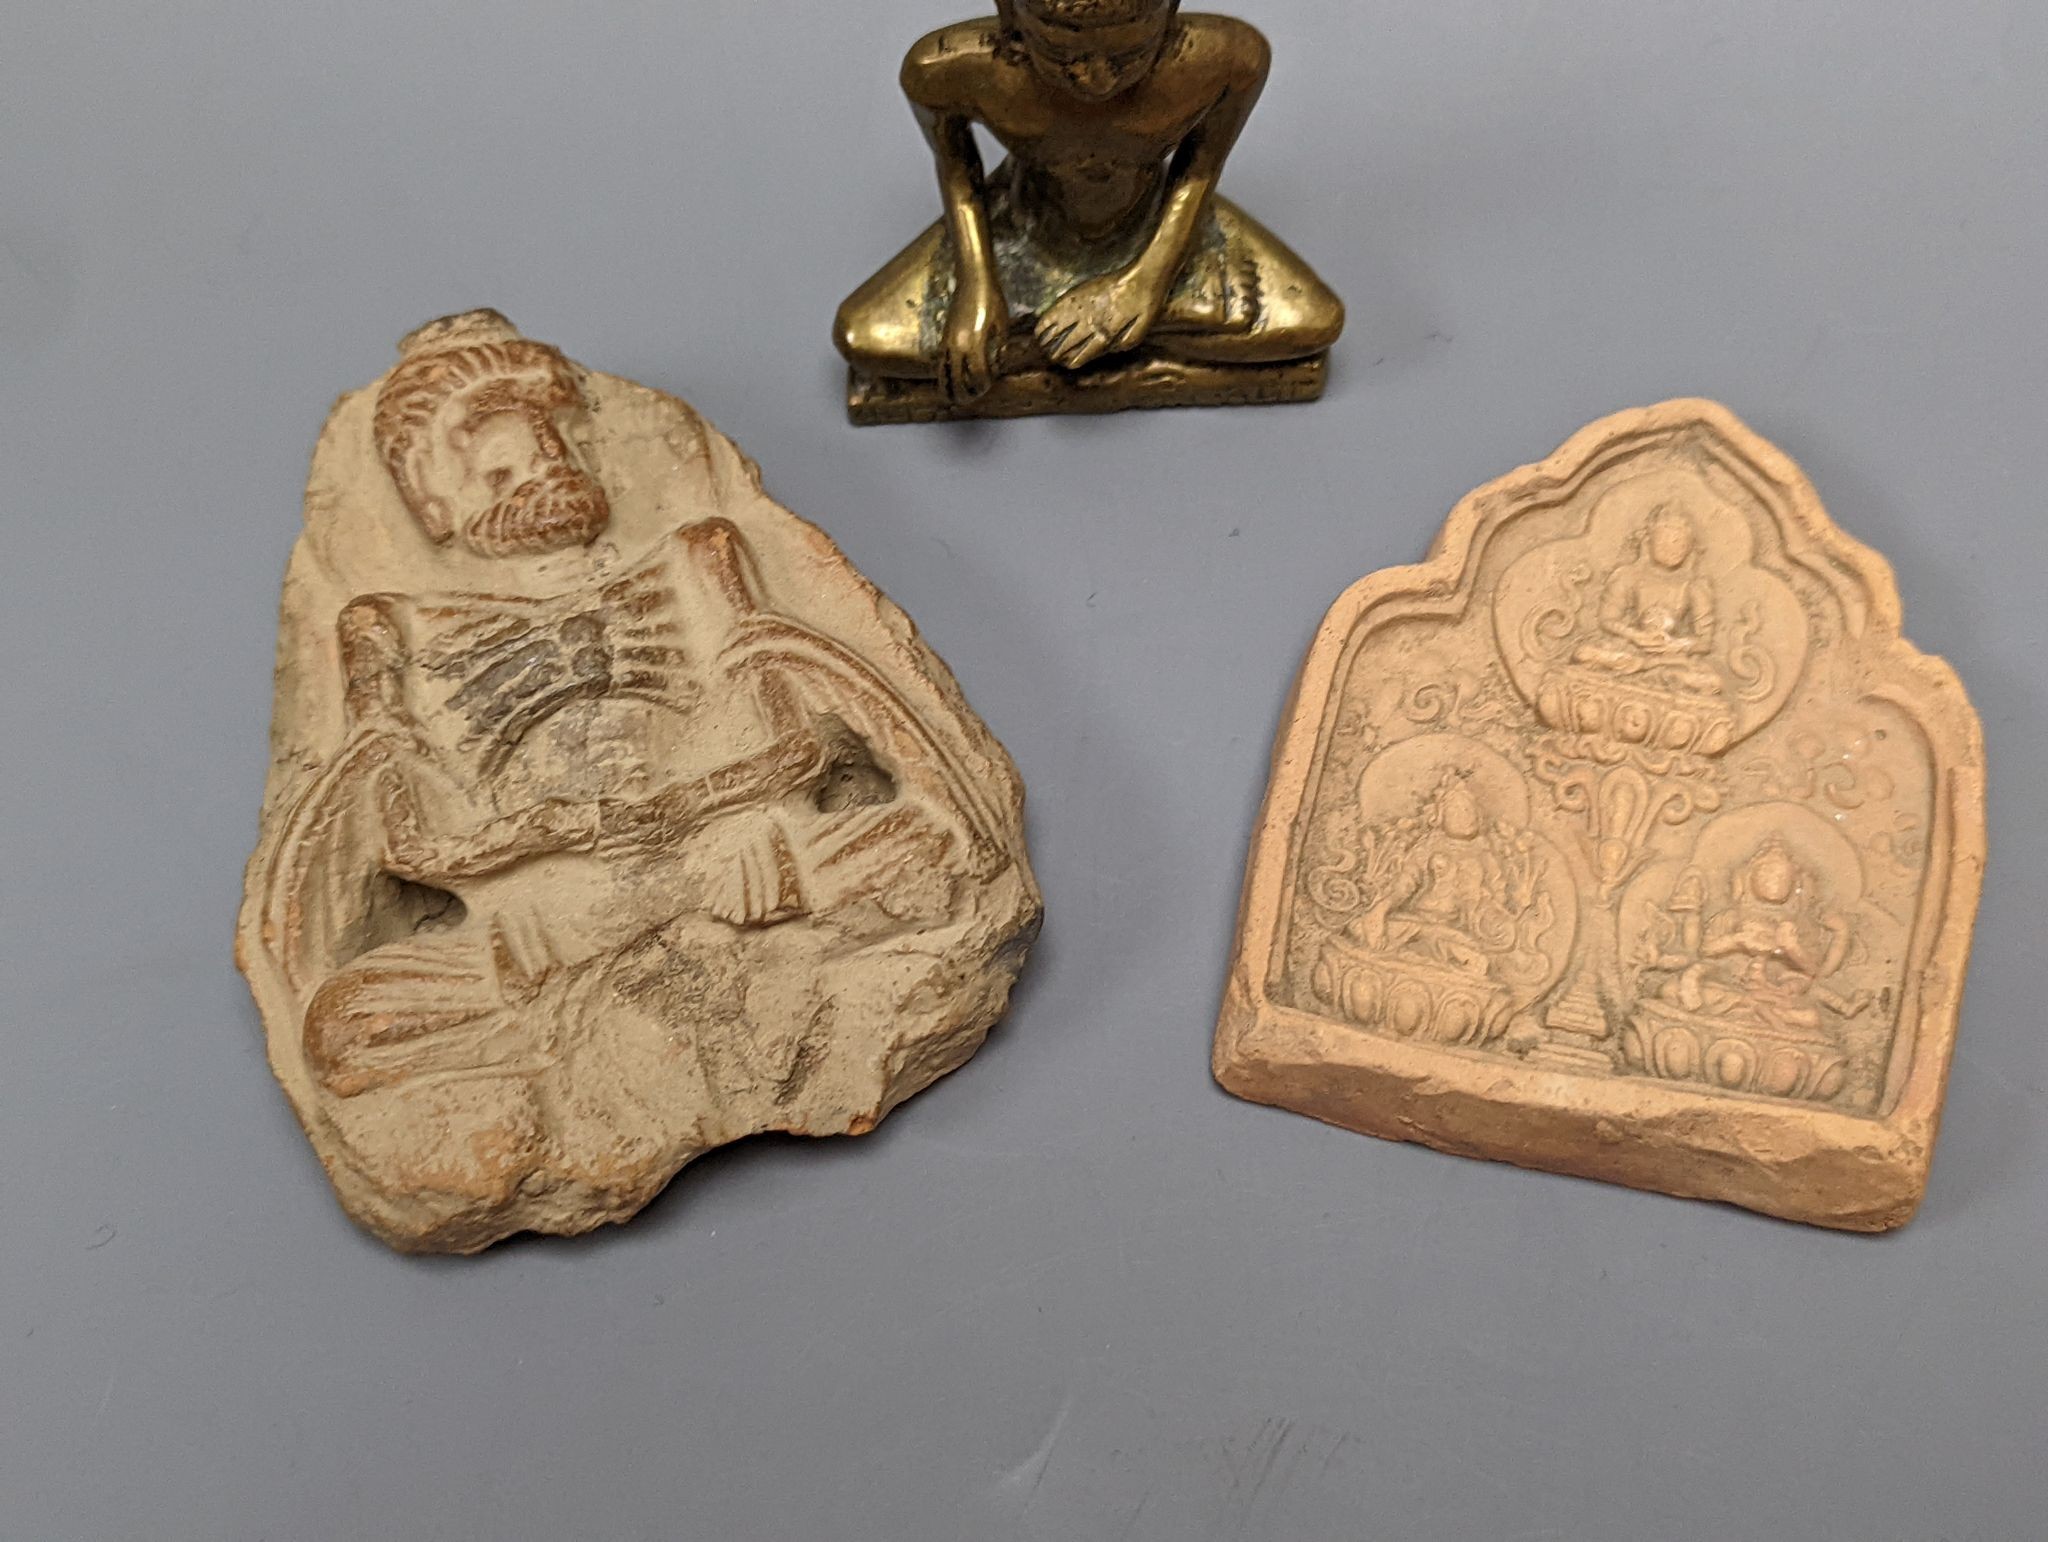 A small bronze seated figure of Buddha and two clay Buddhist tablets, largest 8 cm - Image 2 of 3